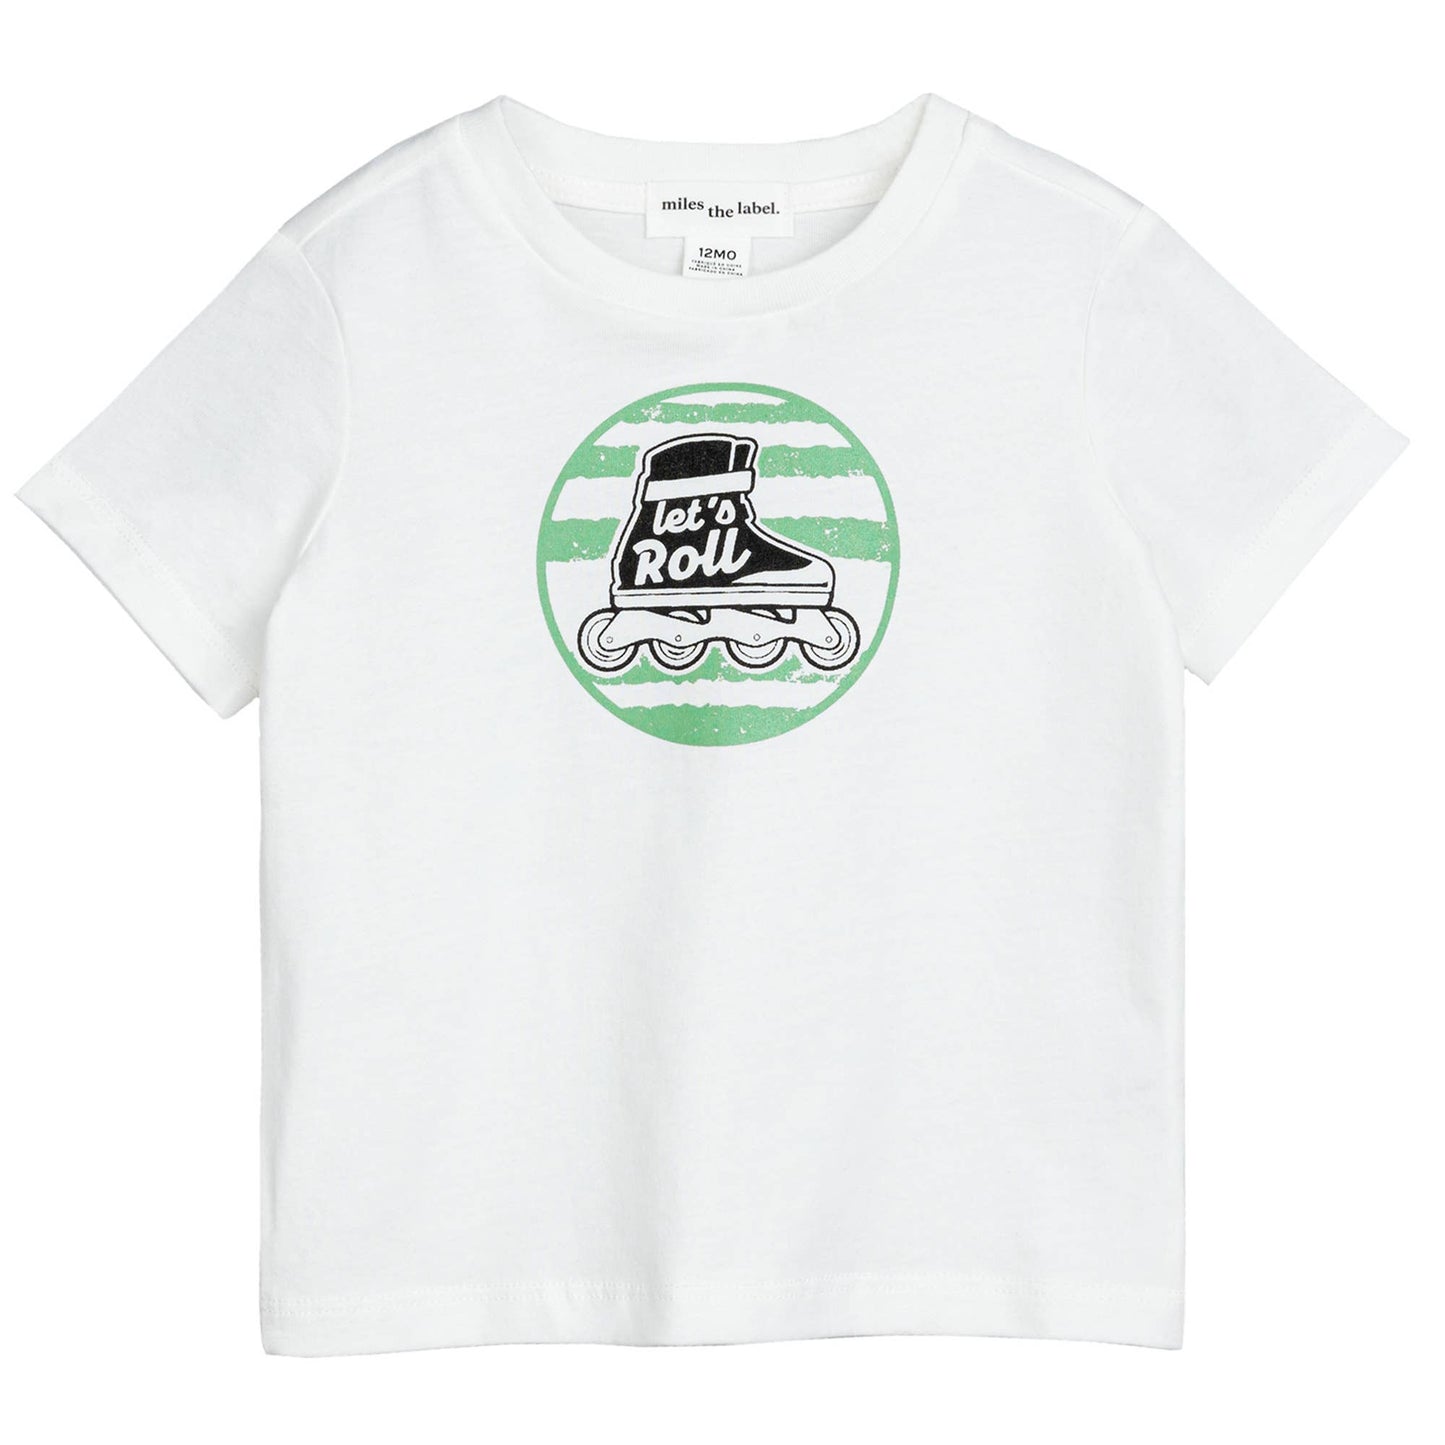 "Let's Roll" Art on Off-White Baby T-Shirt